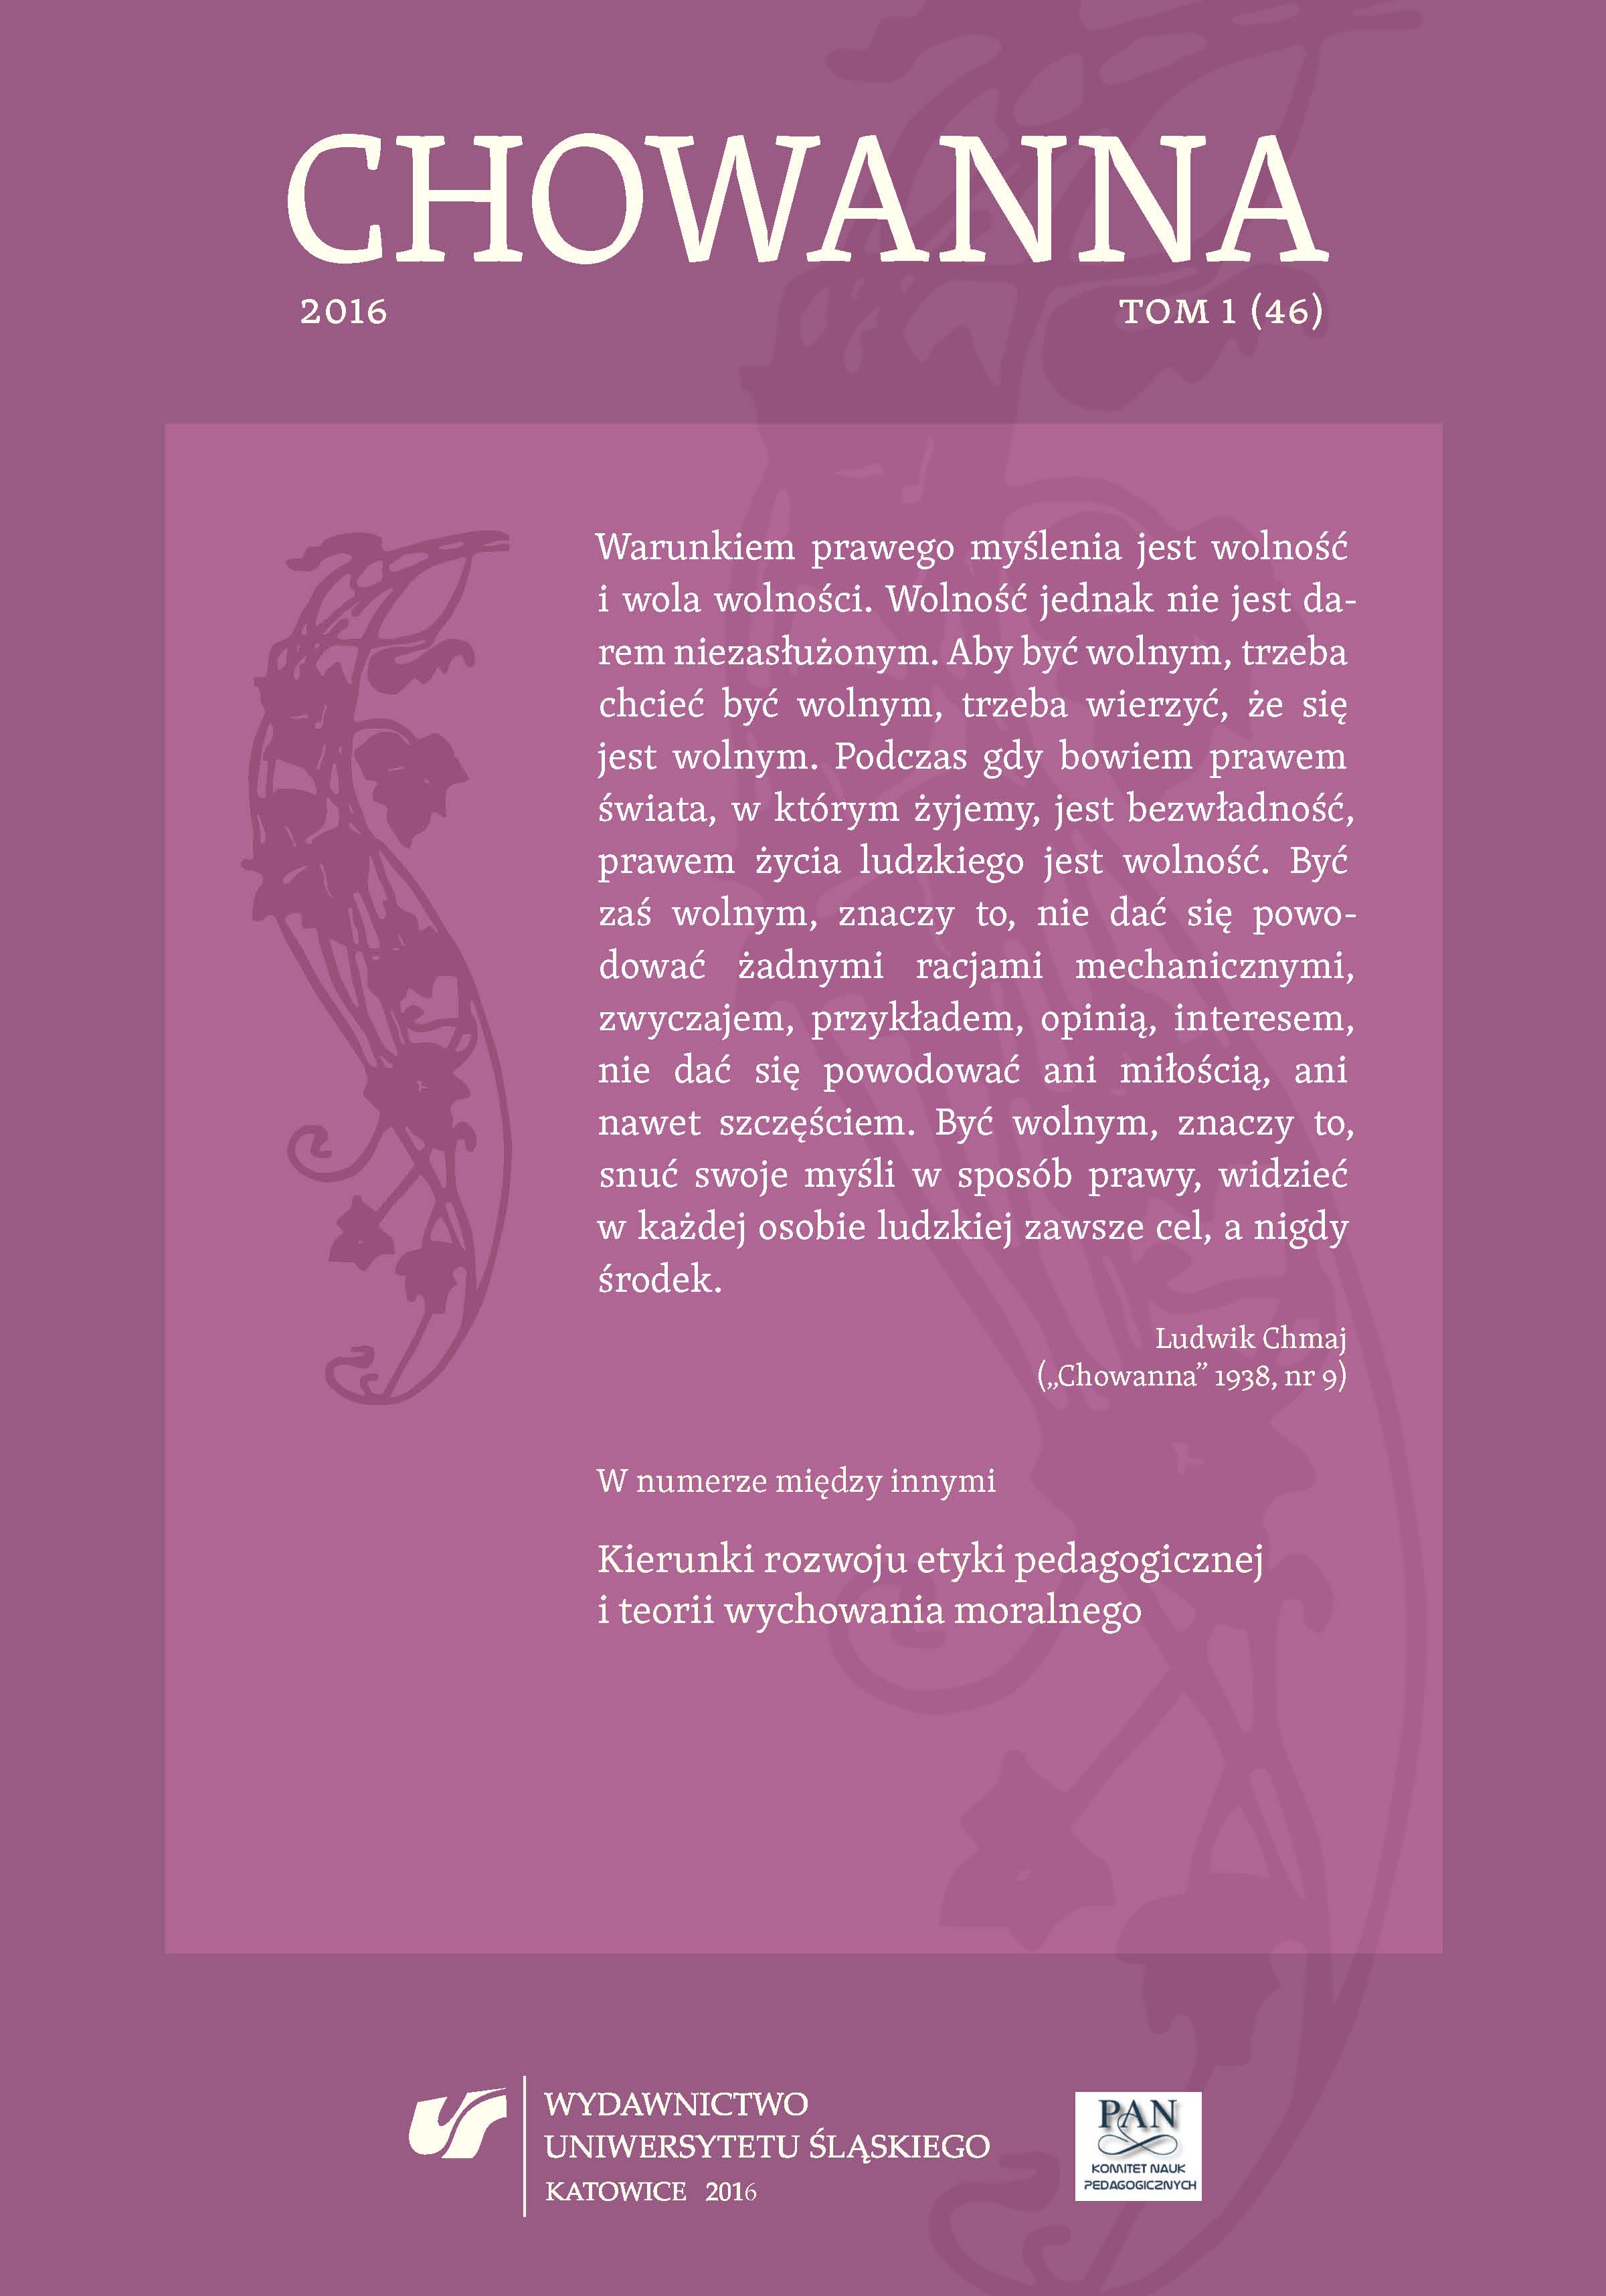 Monographic Part. Developmental Directions of Pedagogical Ethic and Theory of Moral Education (edited by Alicja Żywczok): Educational Preparation for Ethical Action for Balanced Development Cover Image